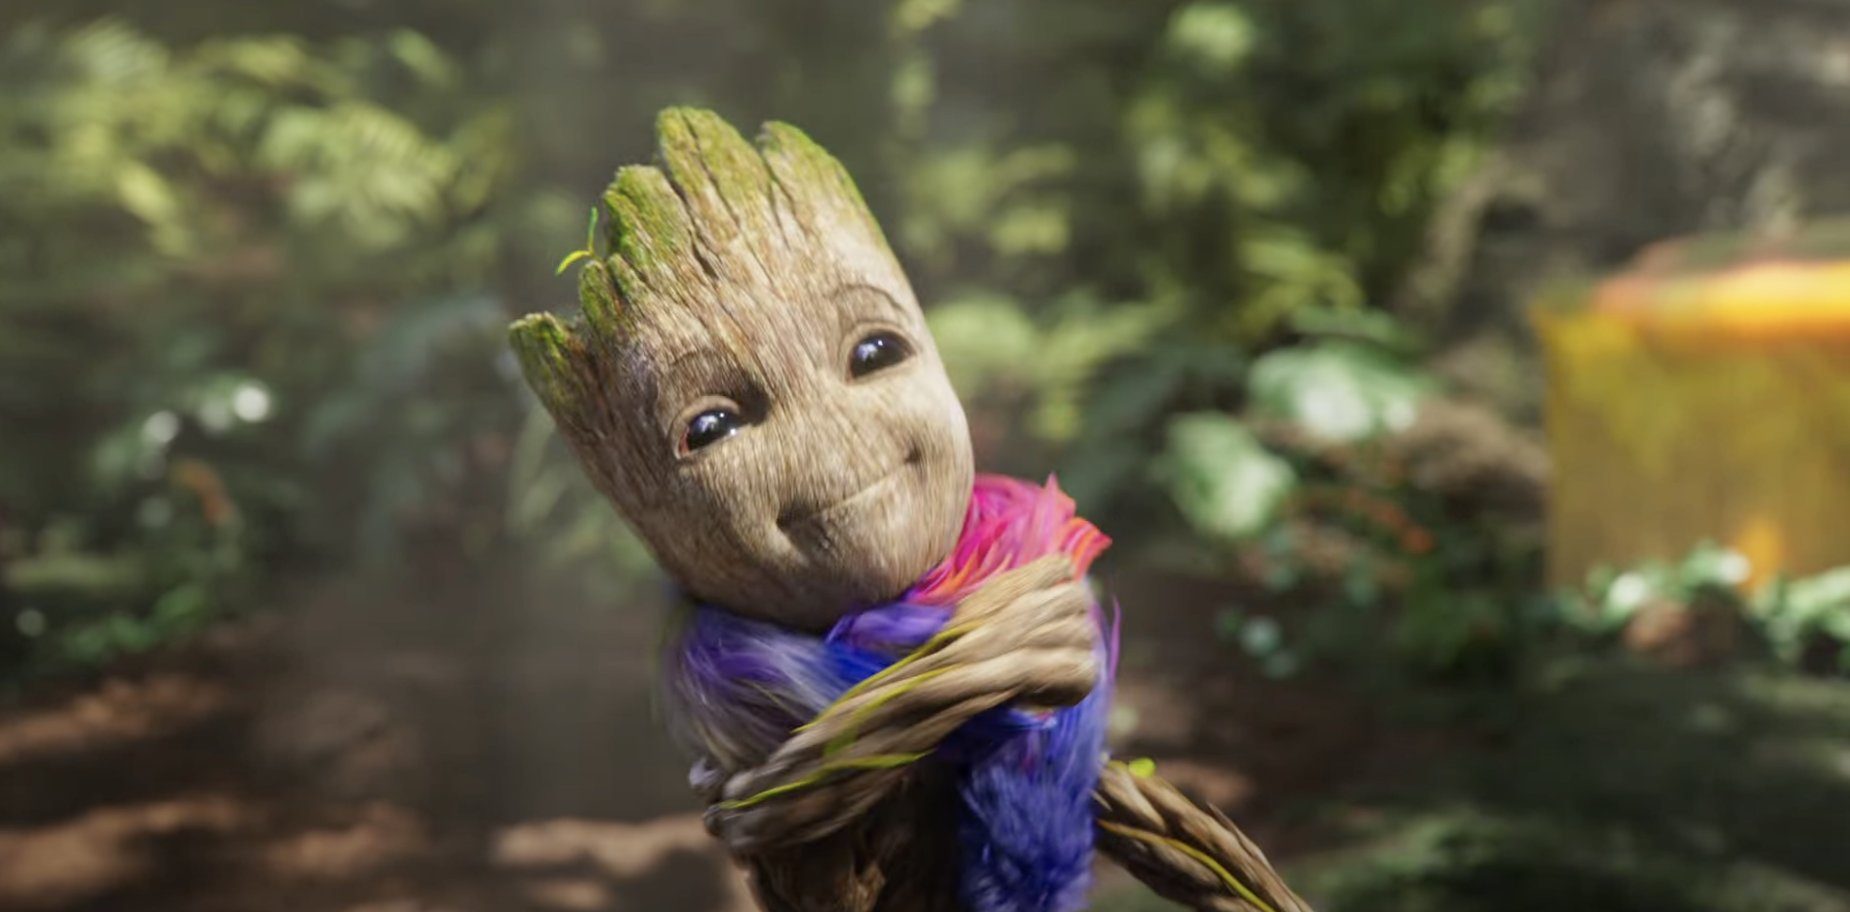 WATCH: Animated series ‘I Am Groot’ drops first trailer